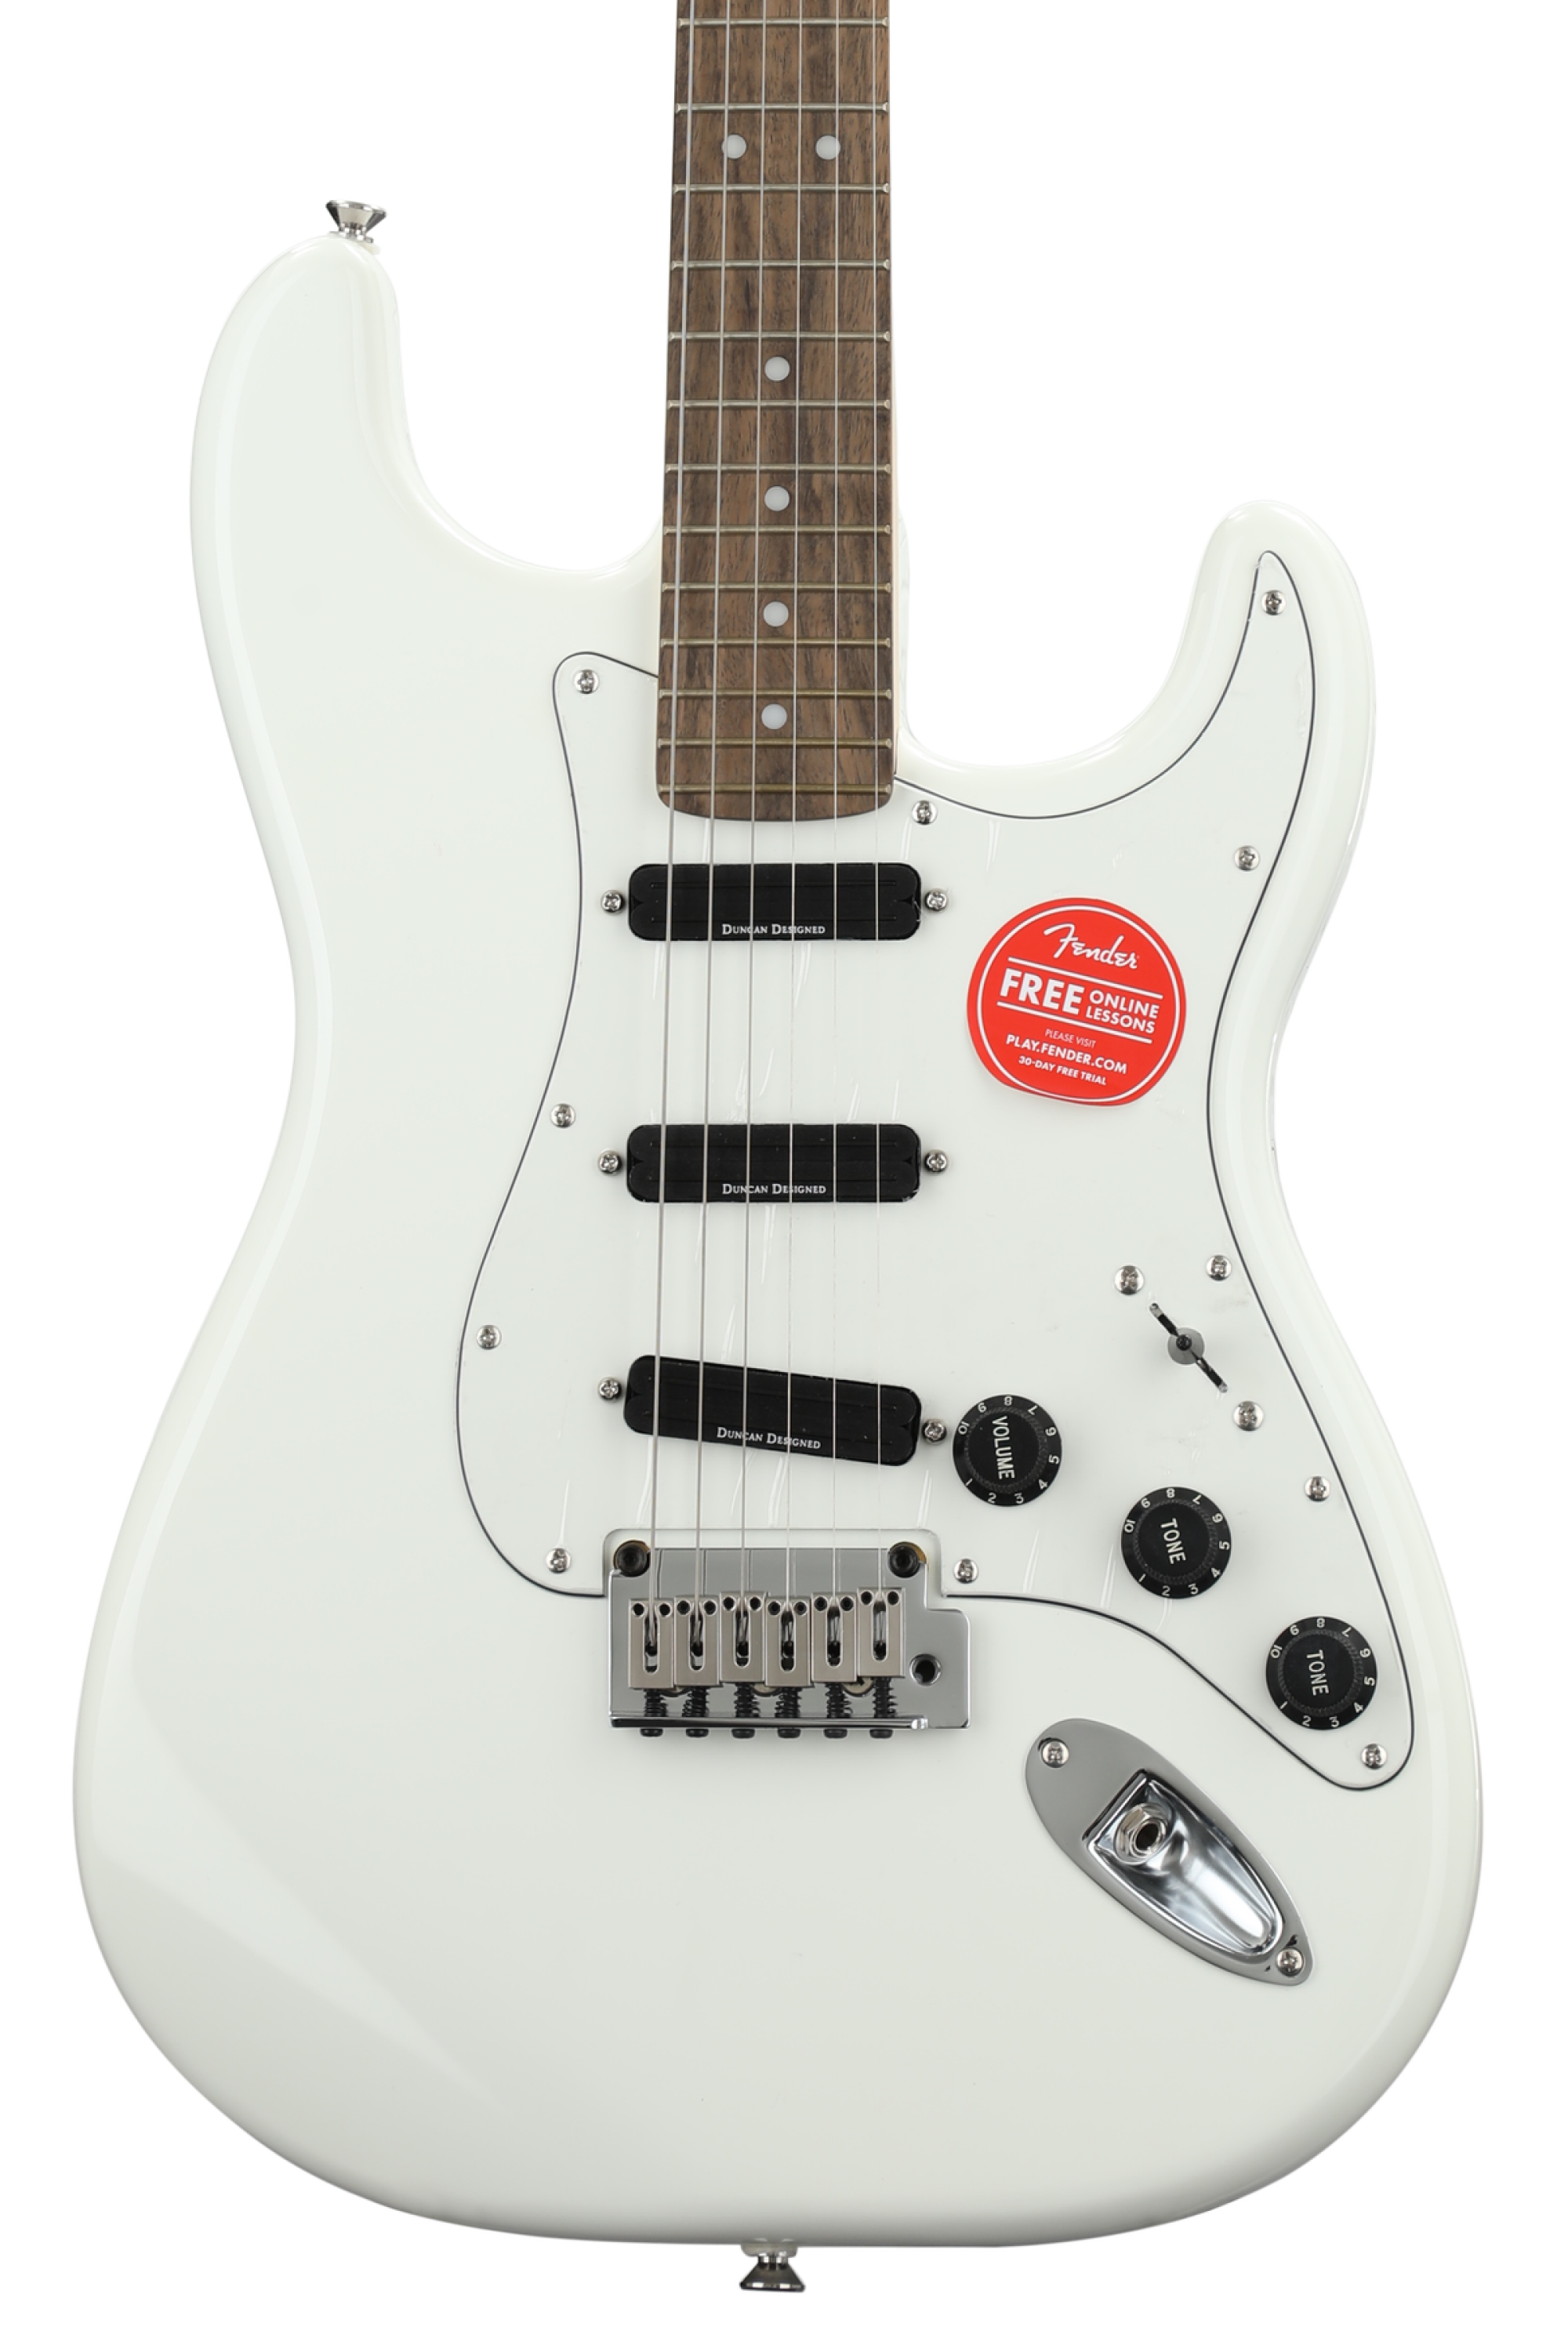 Squier Deluxe Hot Rails Stratocaster - Olympic White w/ Laurel Fingerboard